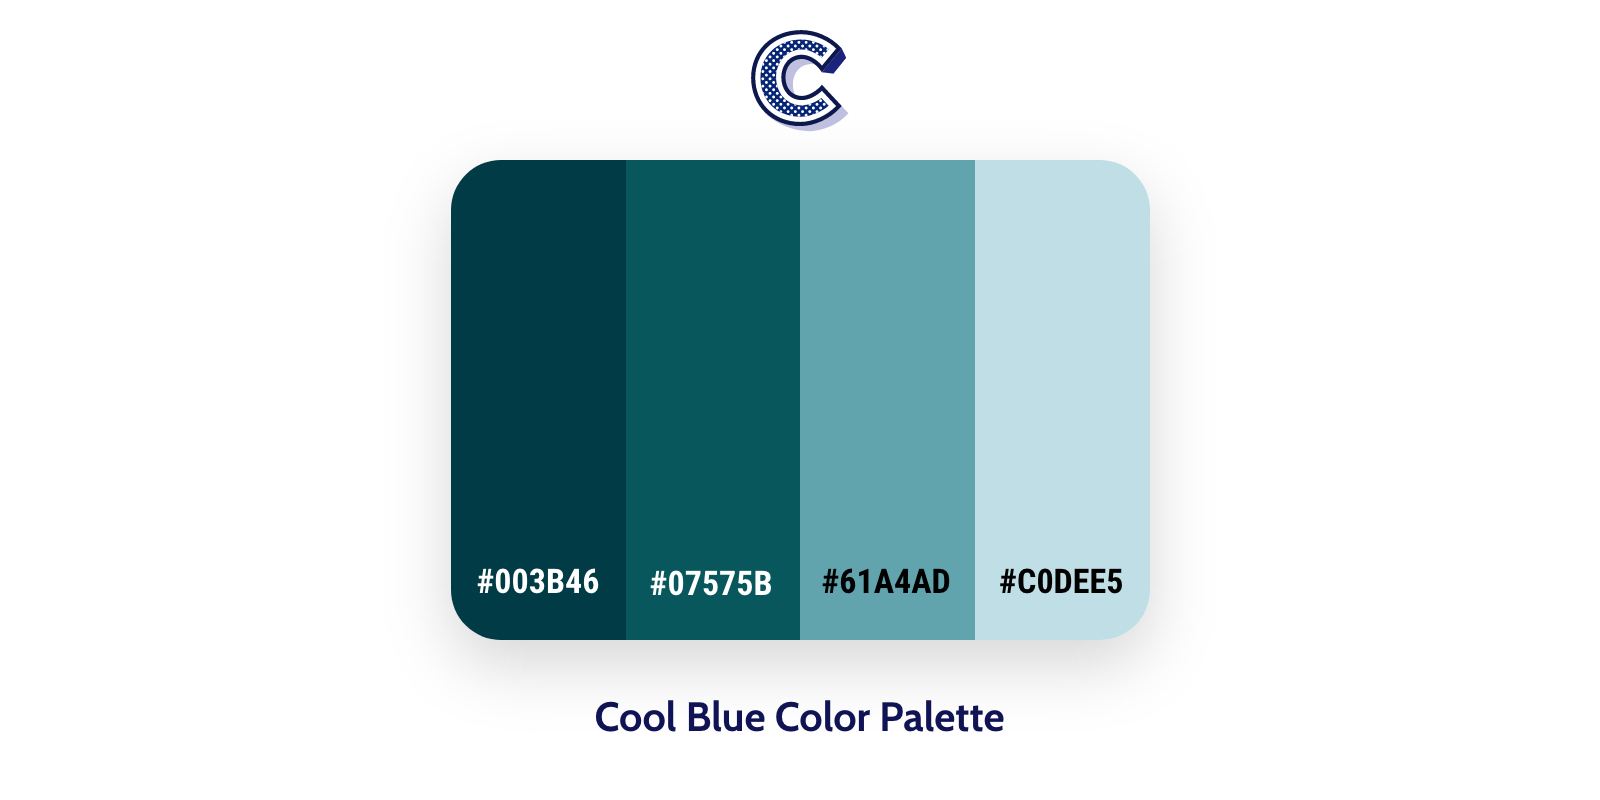 the featured image of cool blue color palette